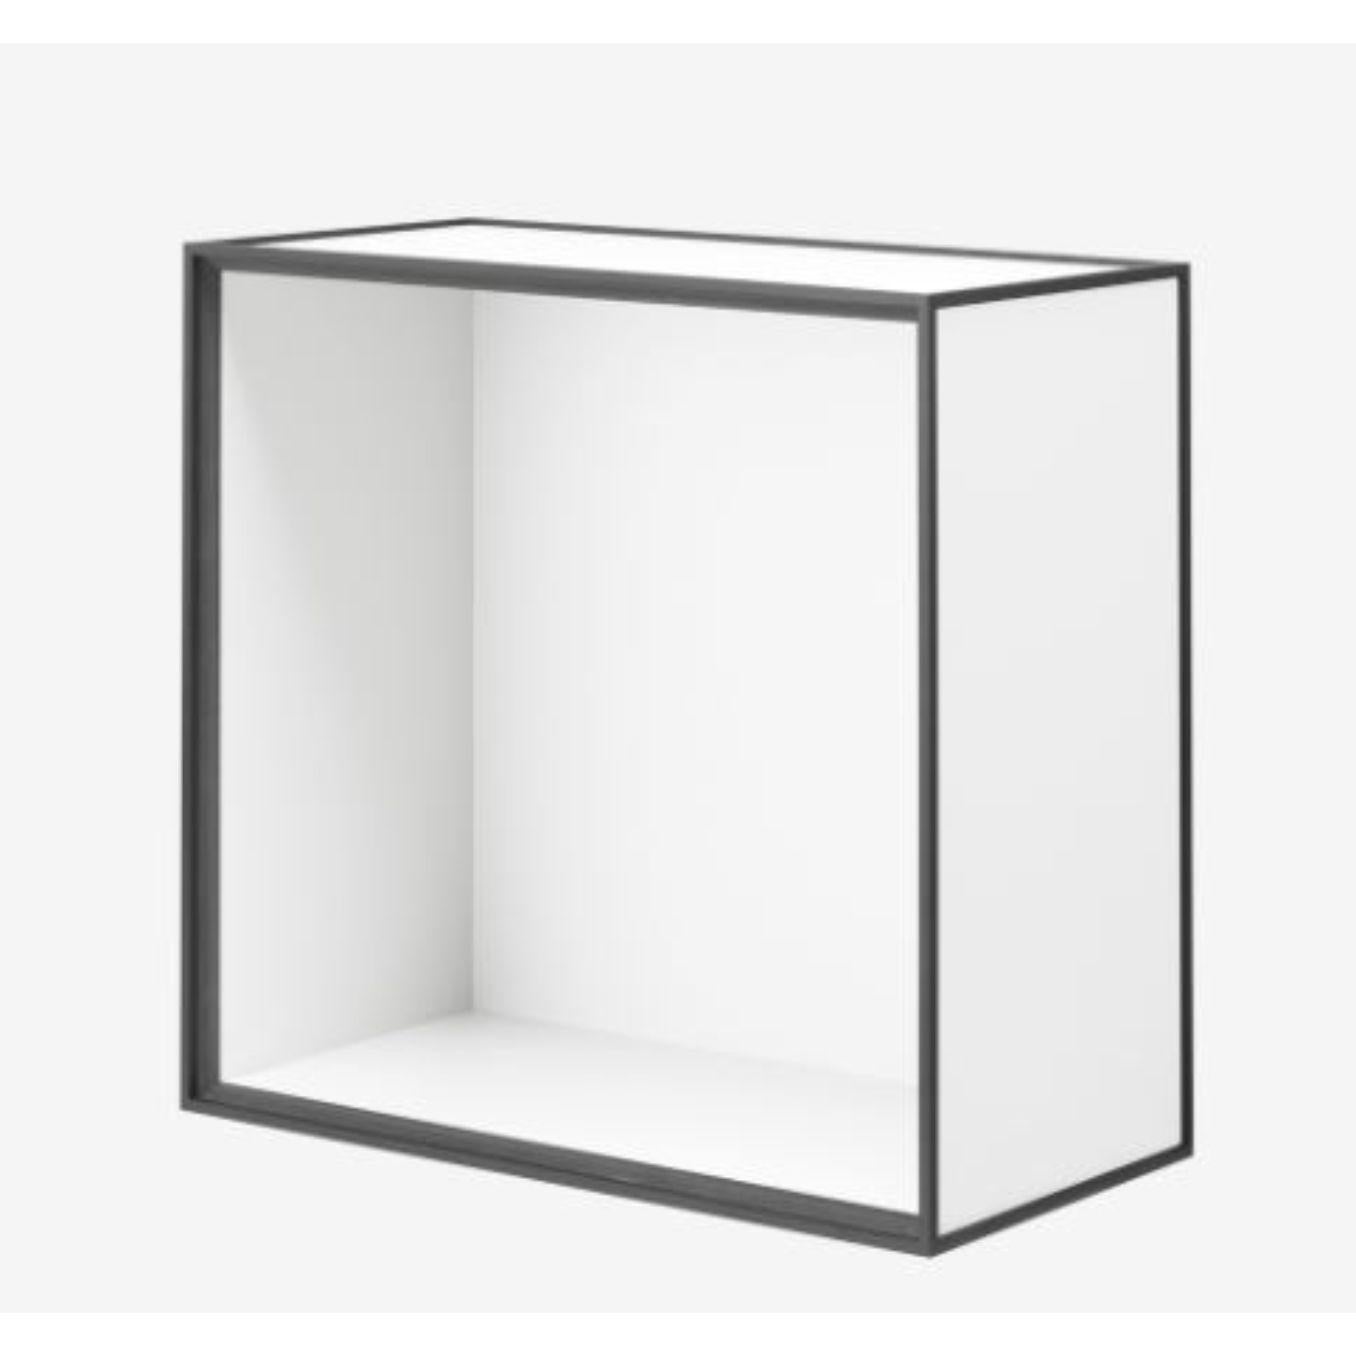 42 White frame box by Lassen
Dimensions: D 42 x W 21 x H 42 cm 
Materials: Finér, Melamin, Melamin, Melamine, Metal, Veneer
Also available in different colours and dimensions. 
Weight: 10.5 Kg.


By Lassen is a Danish design brand focused on